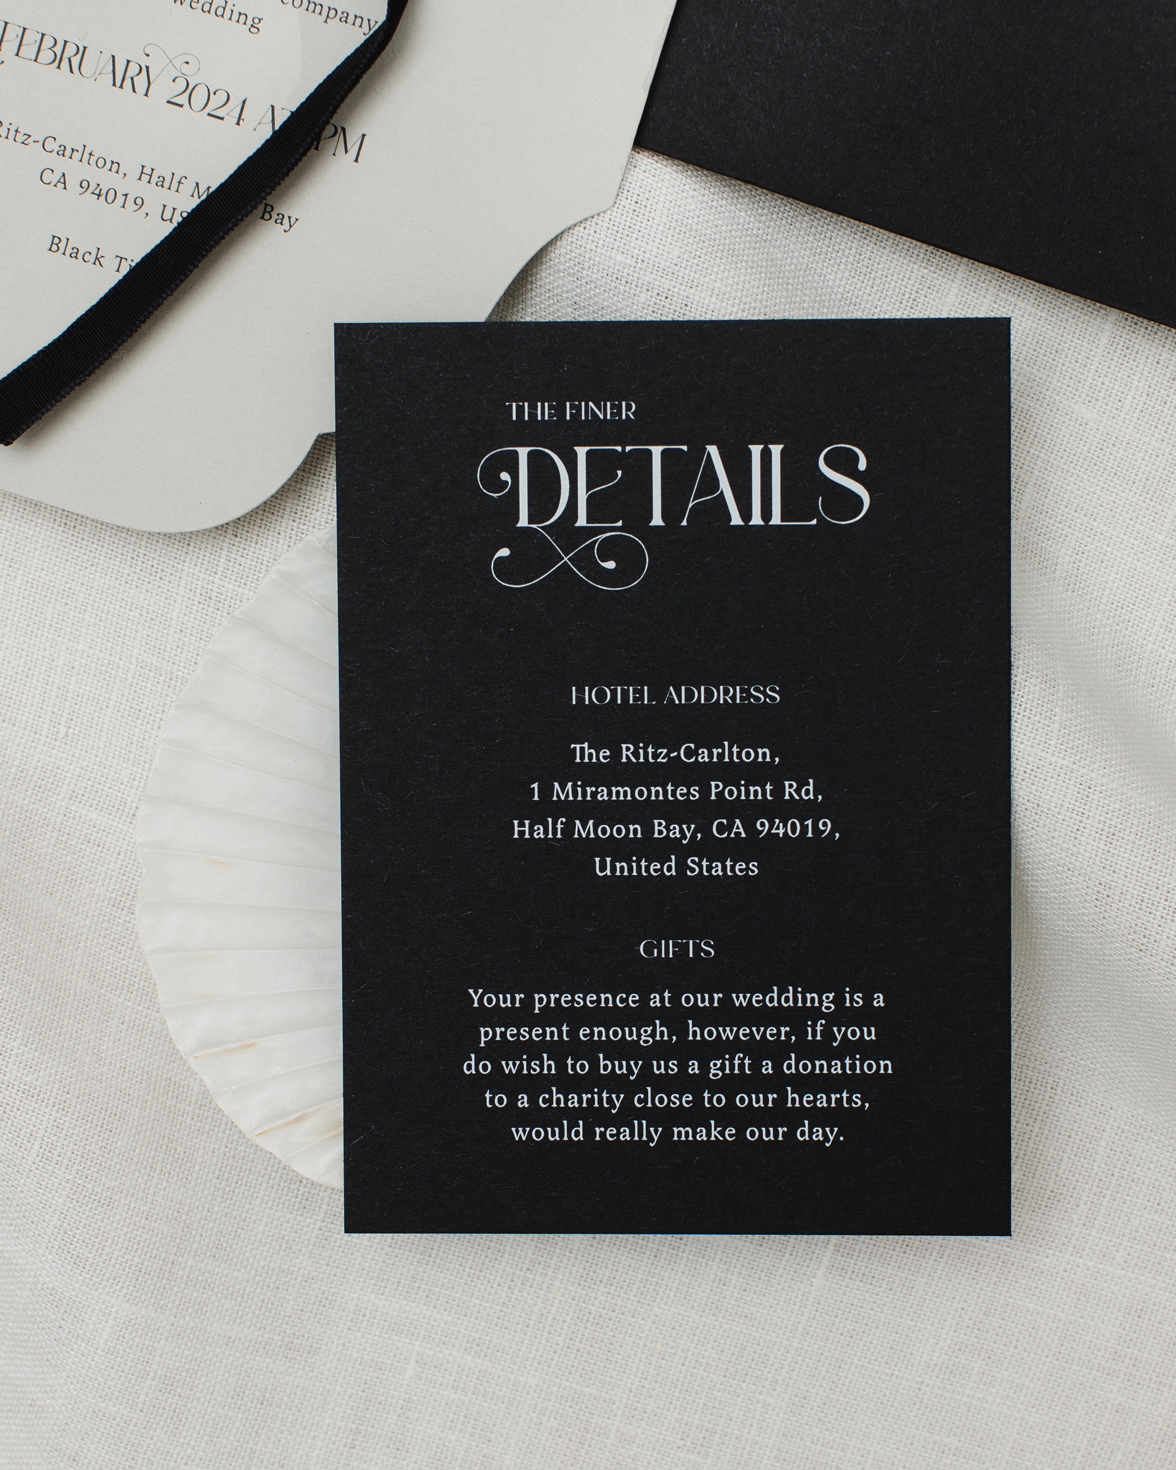 Black and white wedding details card with ornate font